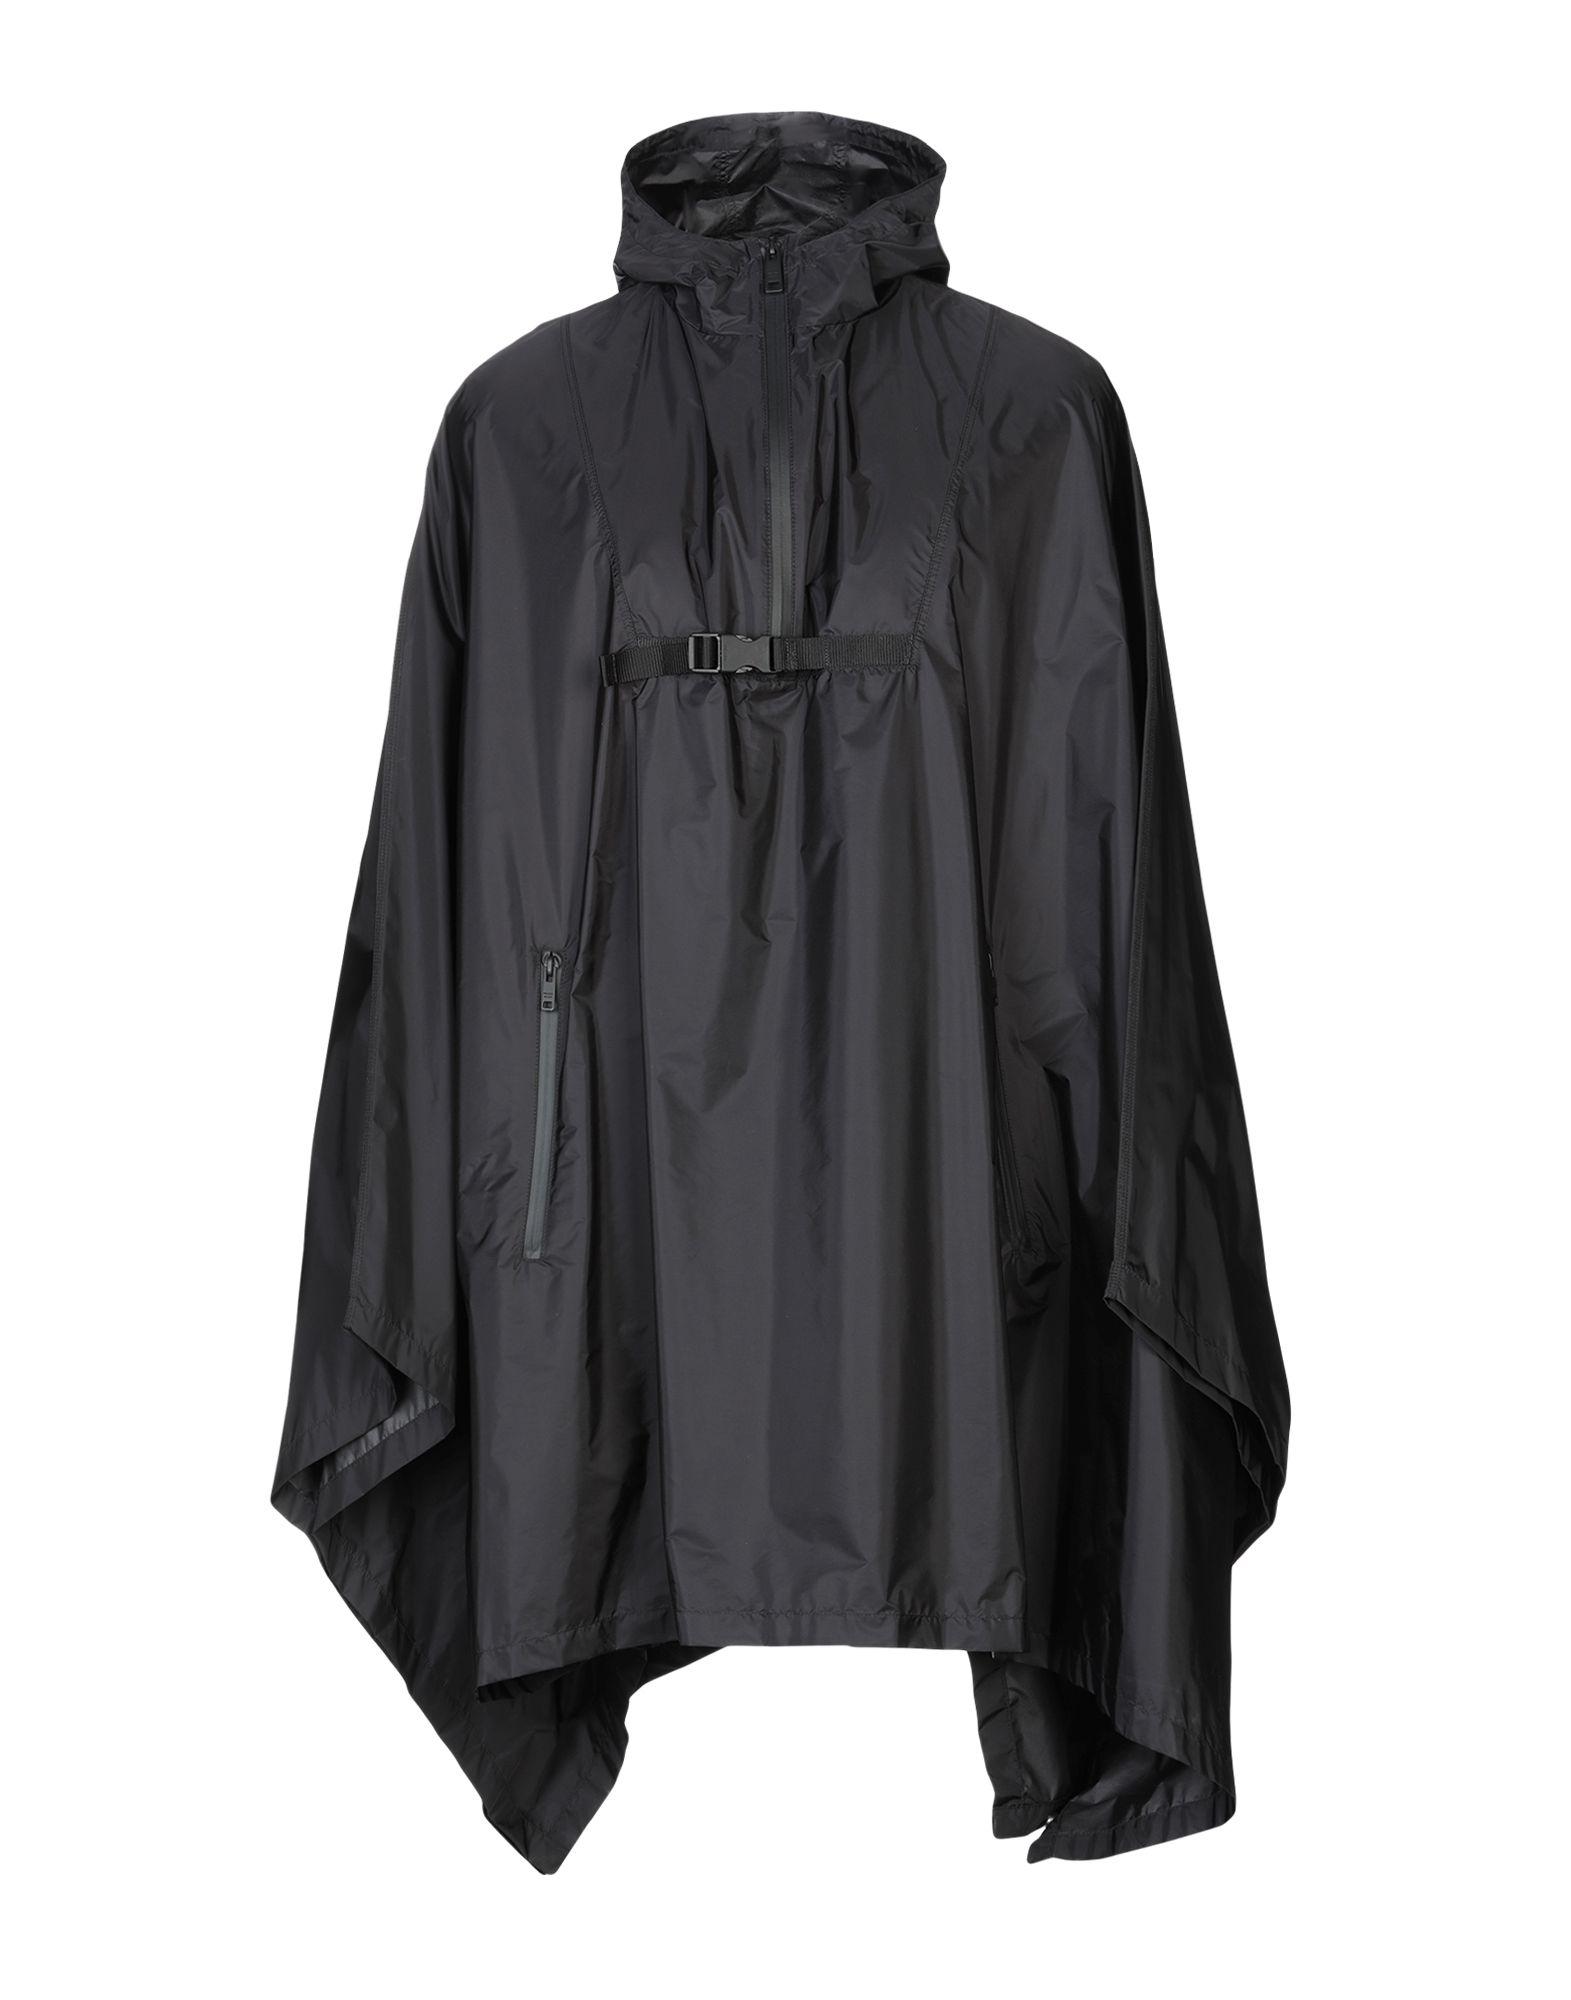 Prada Synthetic Capes & Ponchos in Black for Men - Lyst